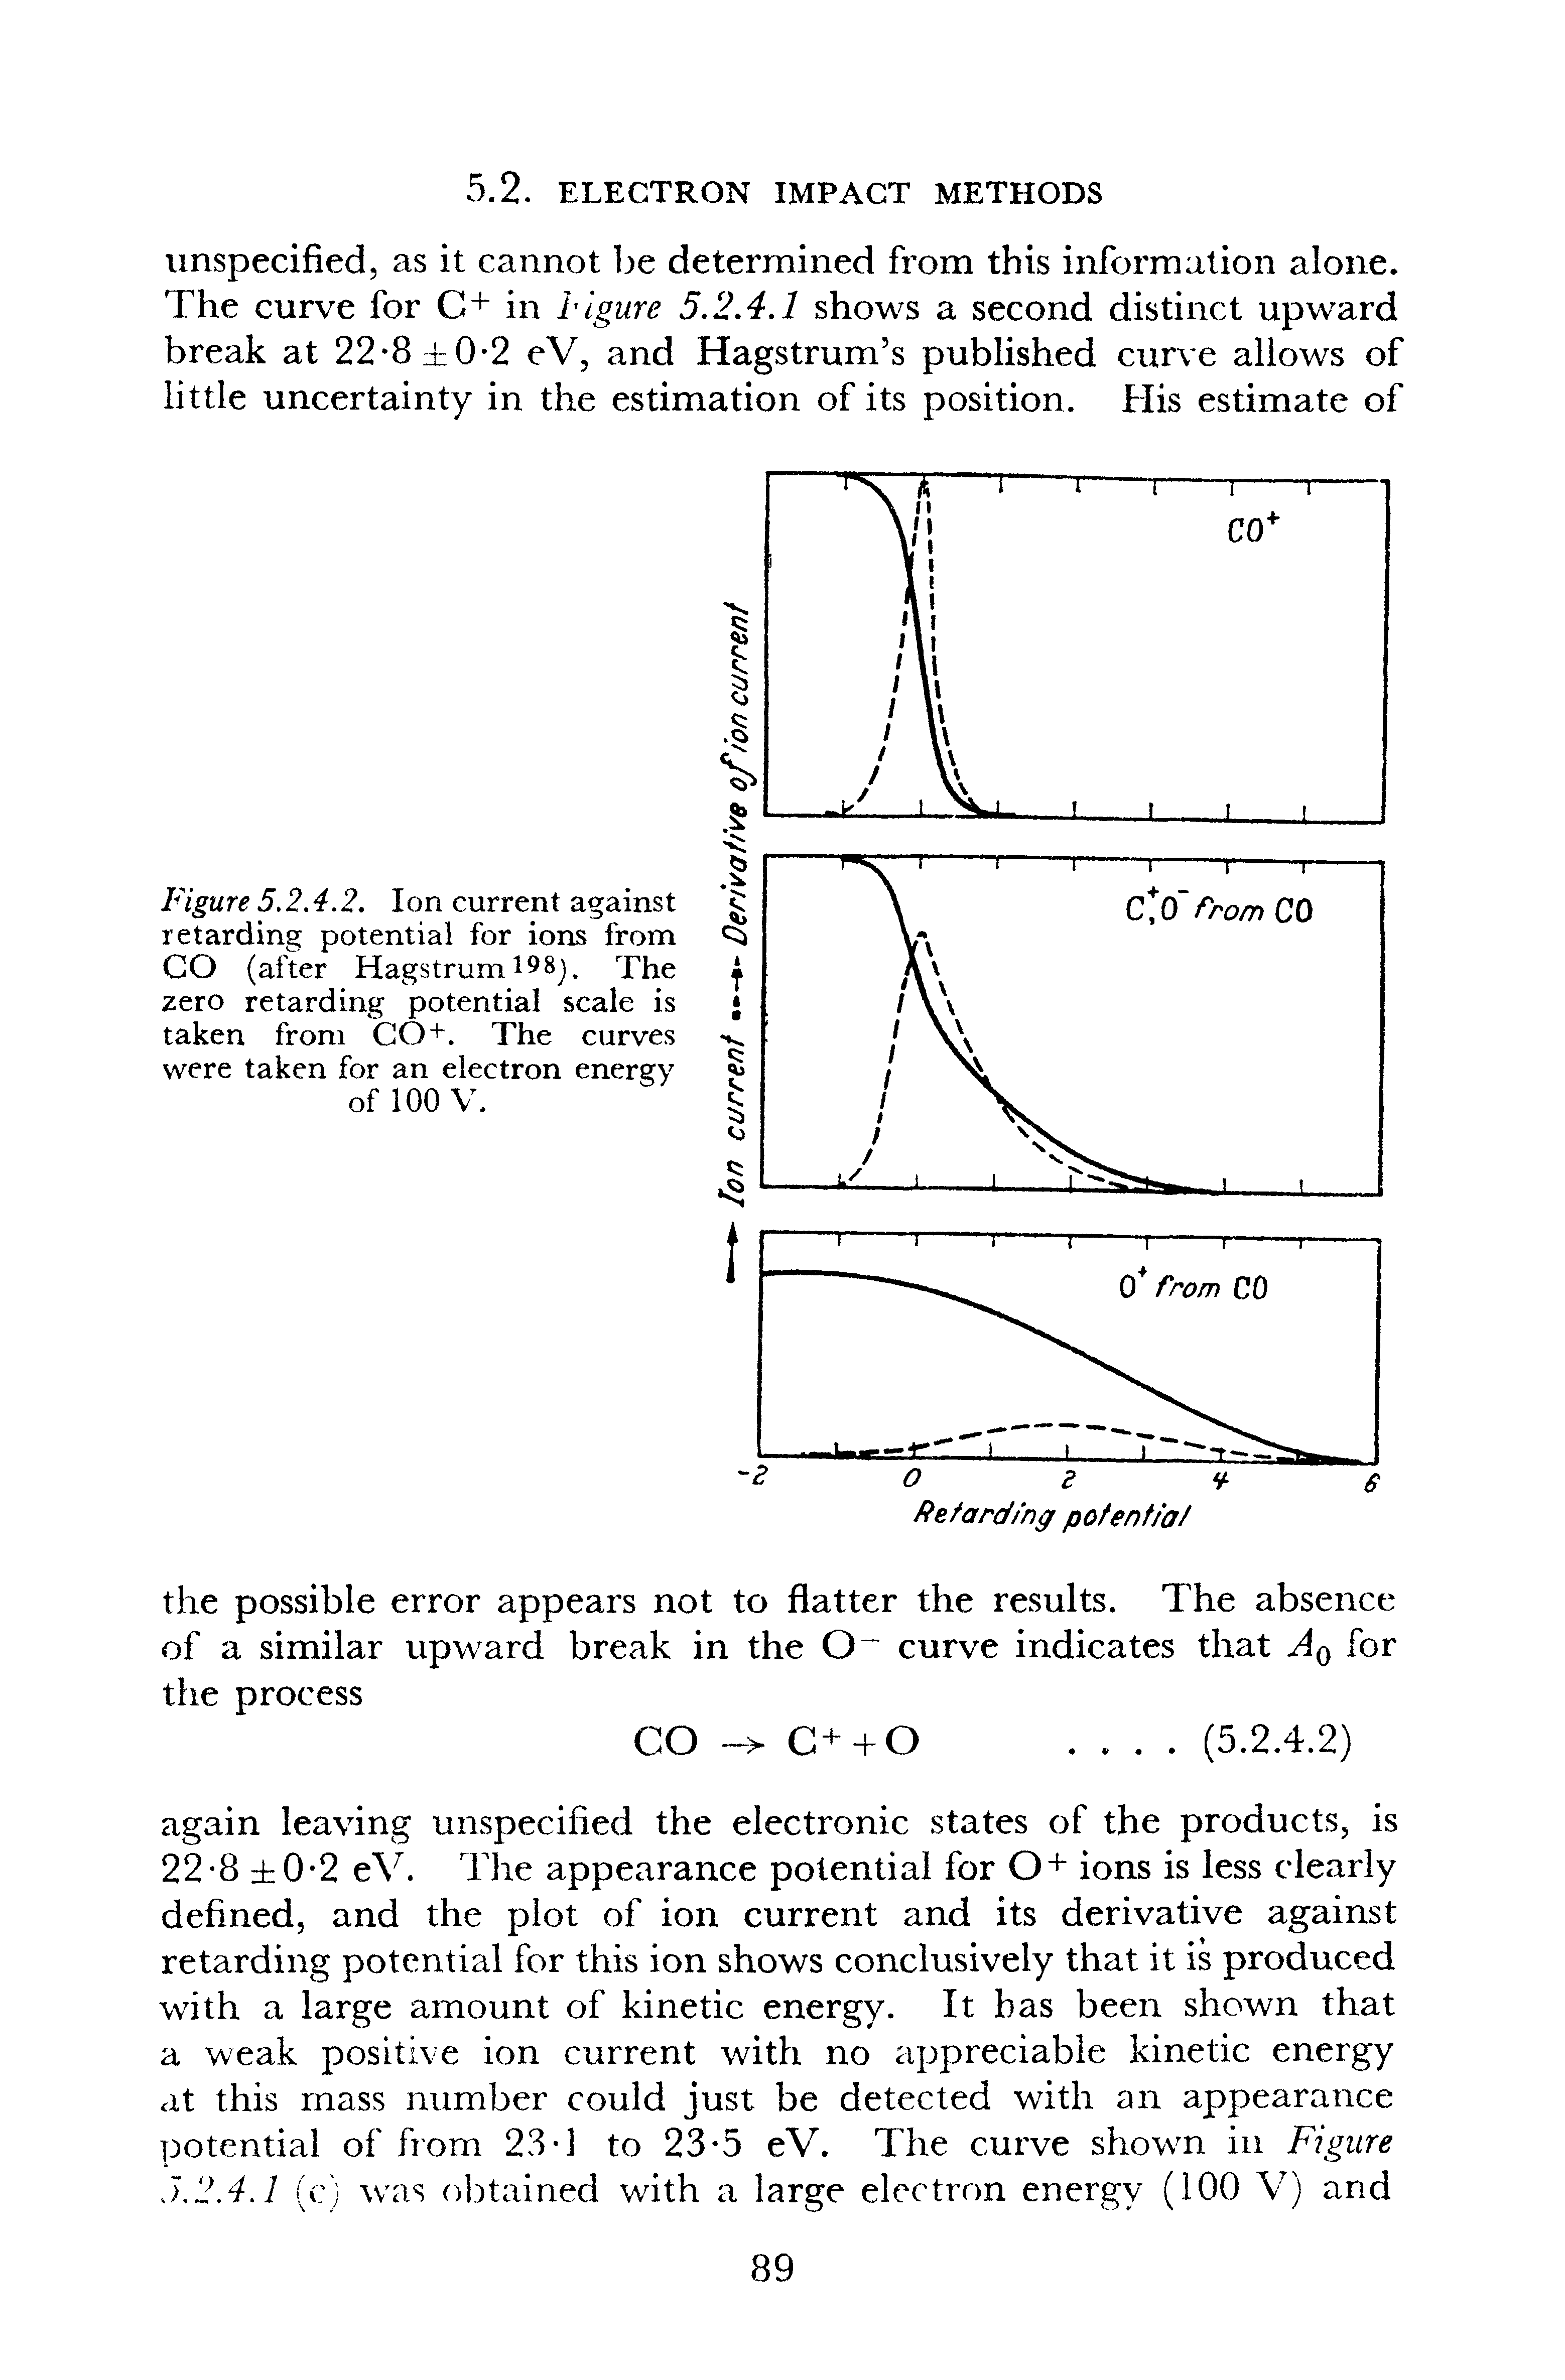 Figure 5.2.4.2. Ion current against retarding potential for ions from GO (after Hagstrumt Sj. The zero retarding potential scale is taken from CO+. The curves were taken for an electron energy of 100 V.